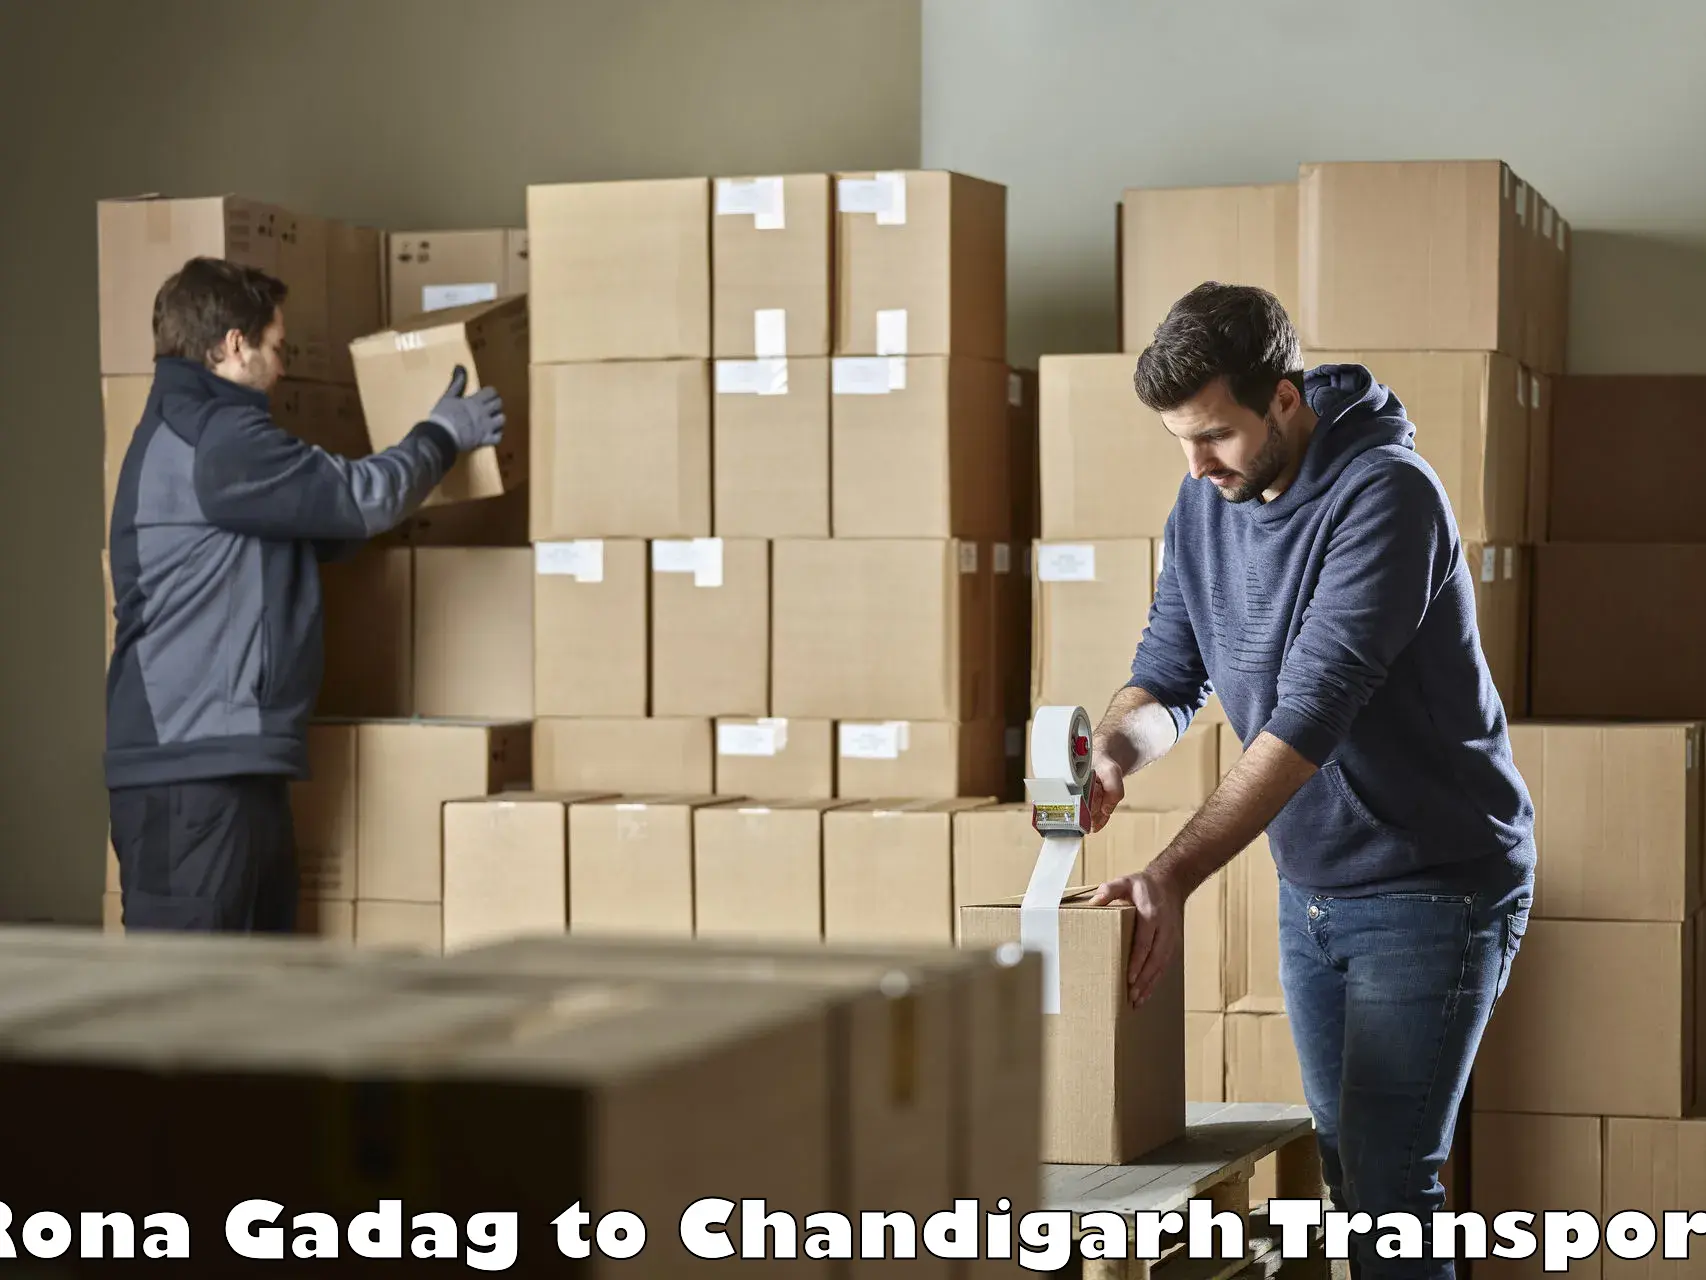 Commercial transport service Rona Gadag to Chandigarh